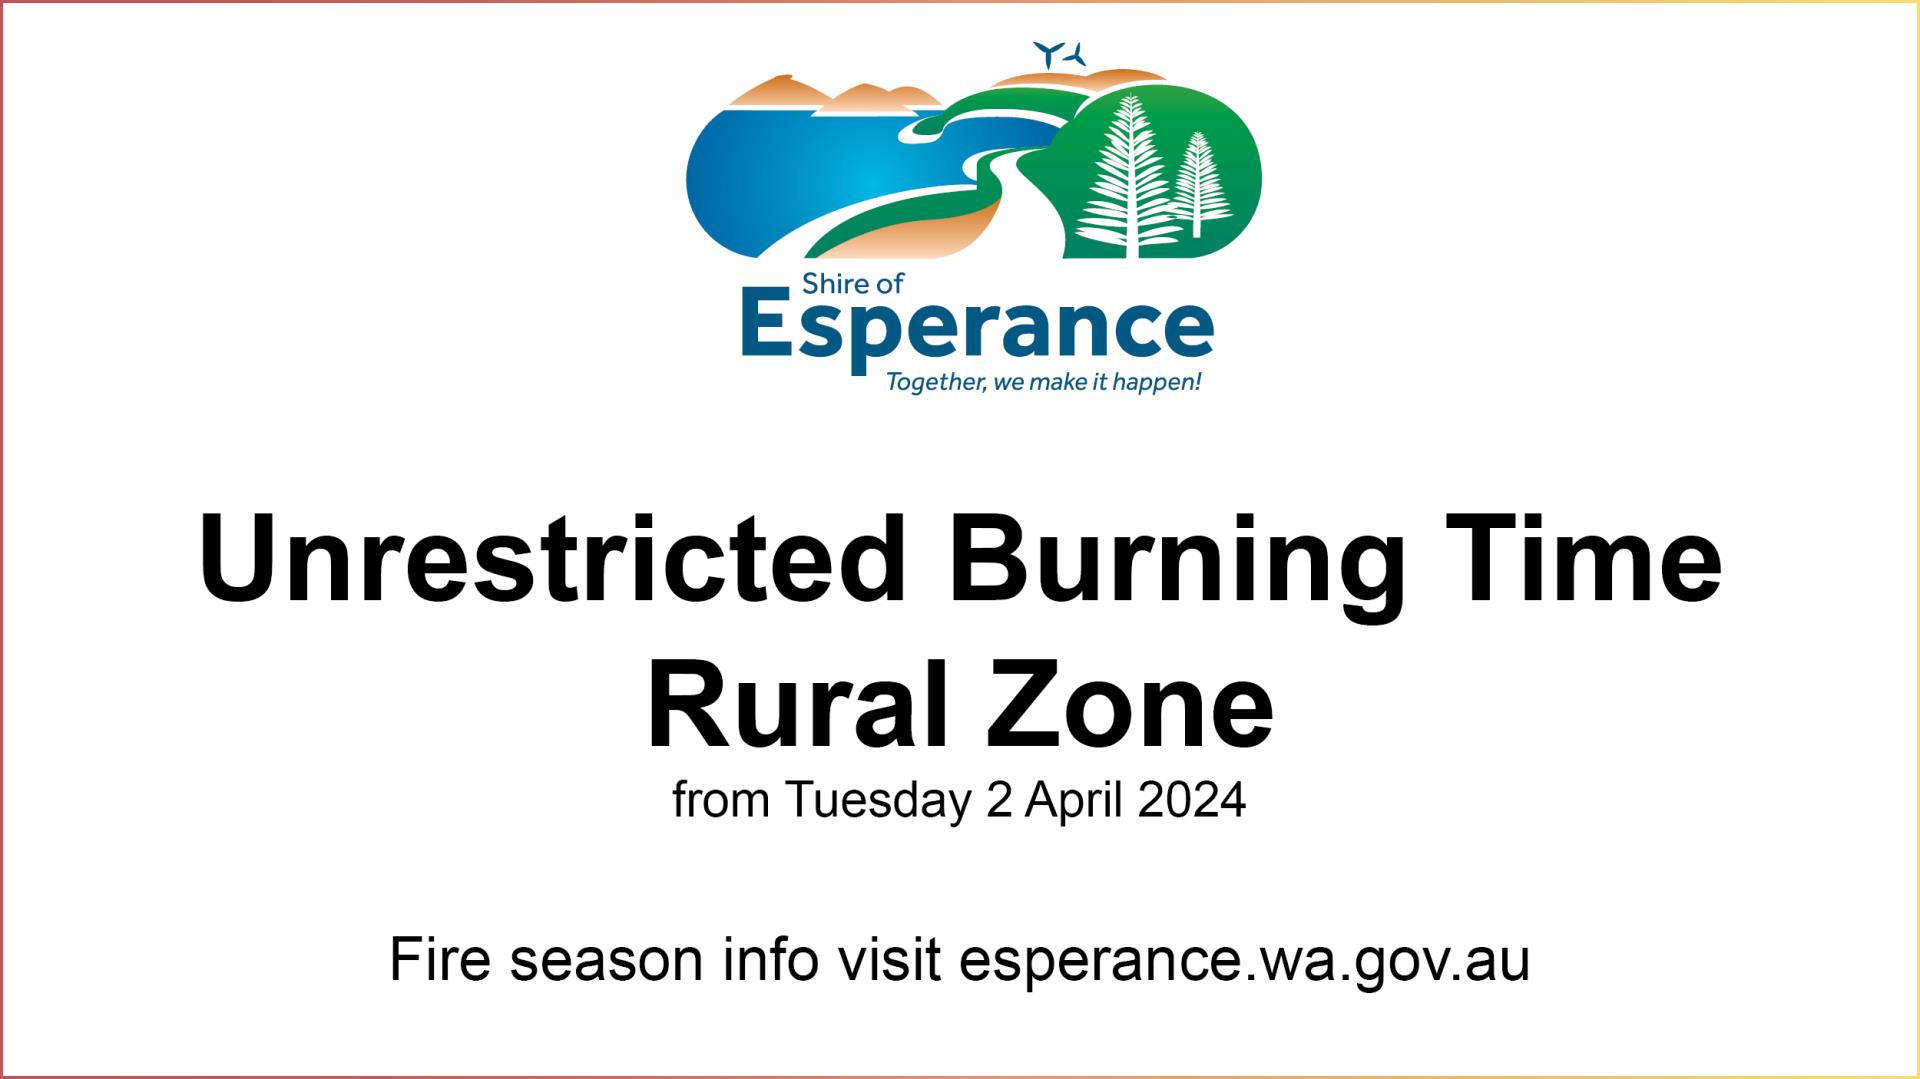 Commencement of Unrestricted Burning Time (Rural Zone)